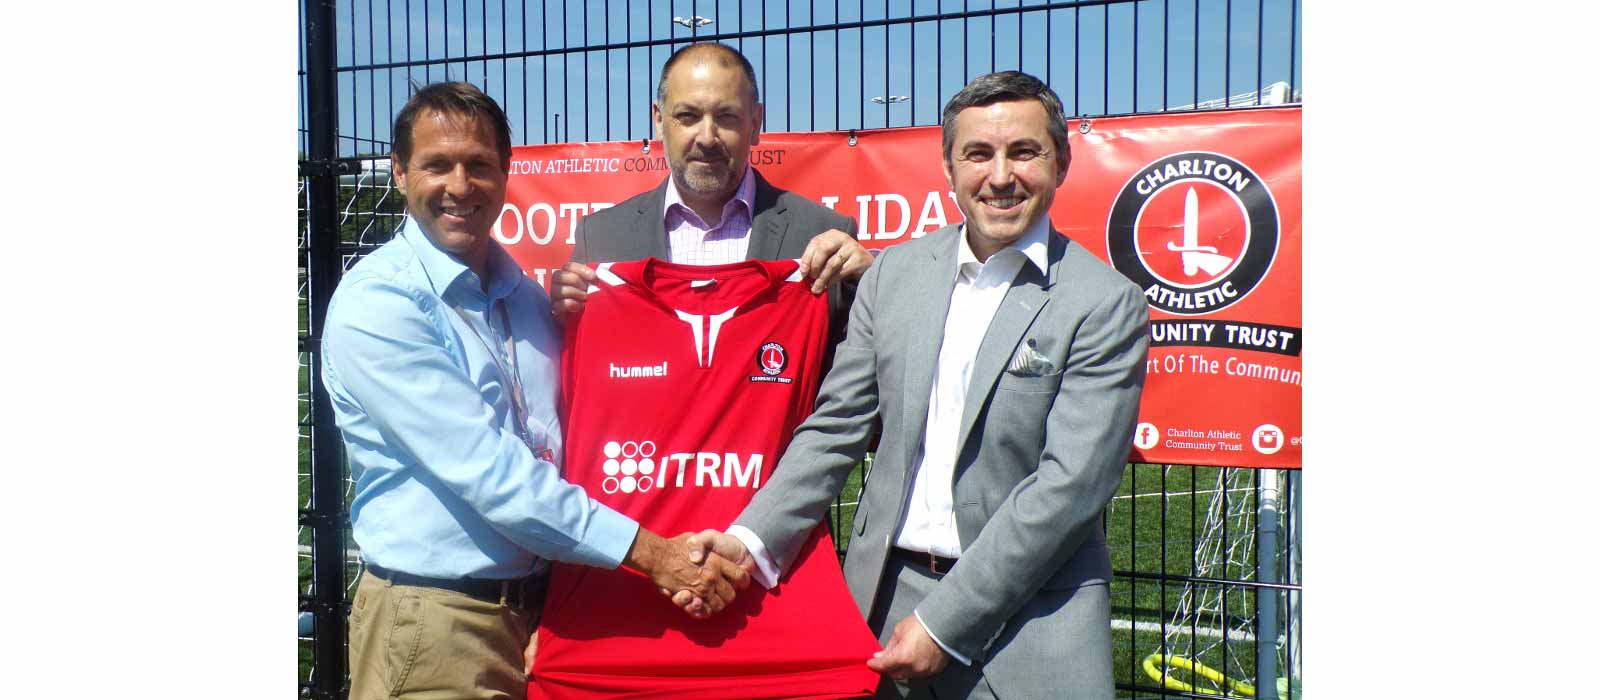 ITRM are the Back-of-Shirt Sponsor on Charlton Athletic's New Kit